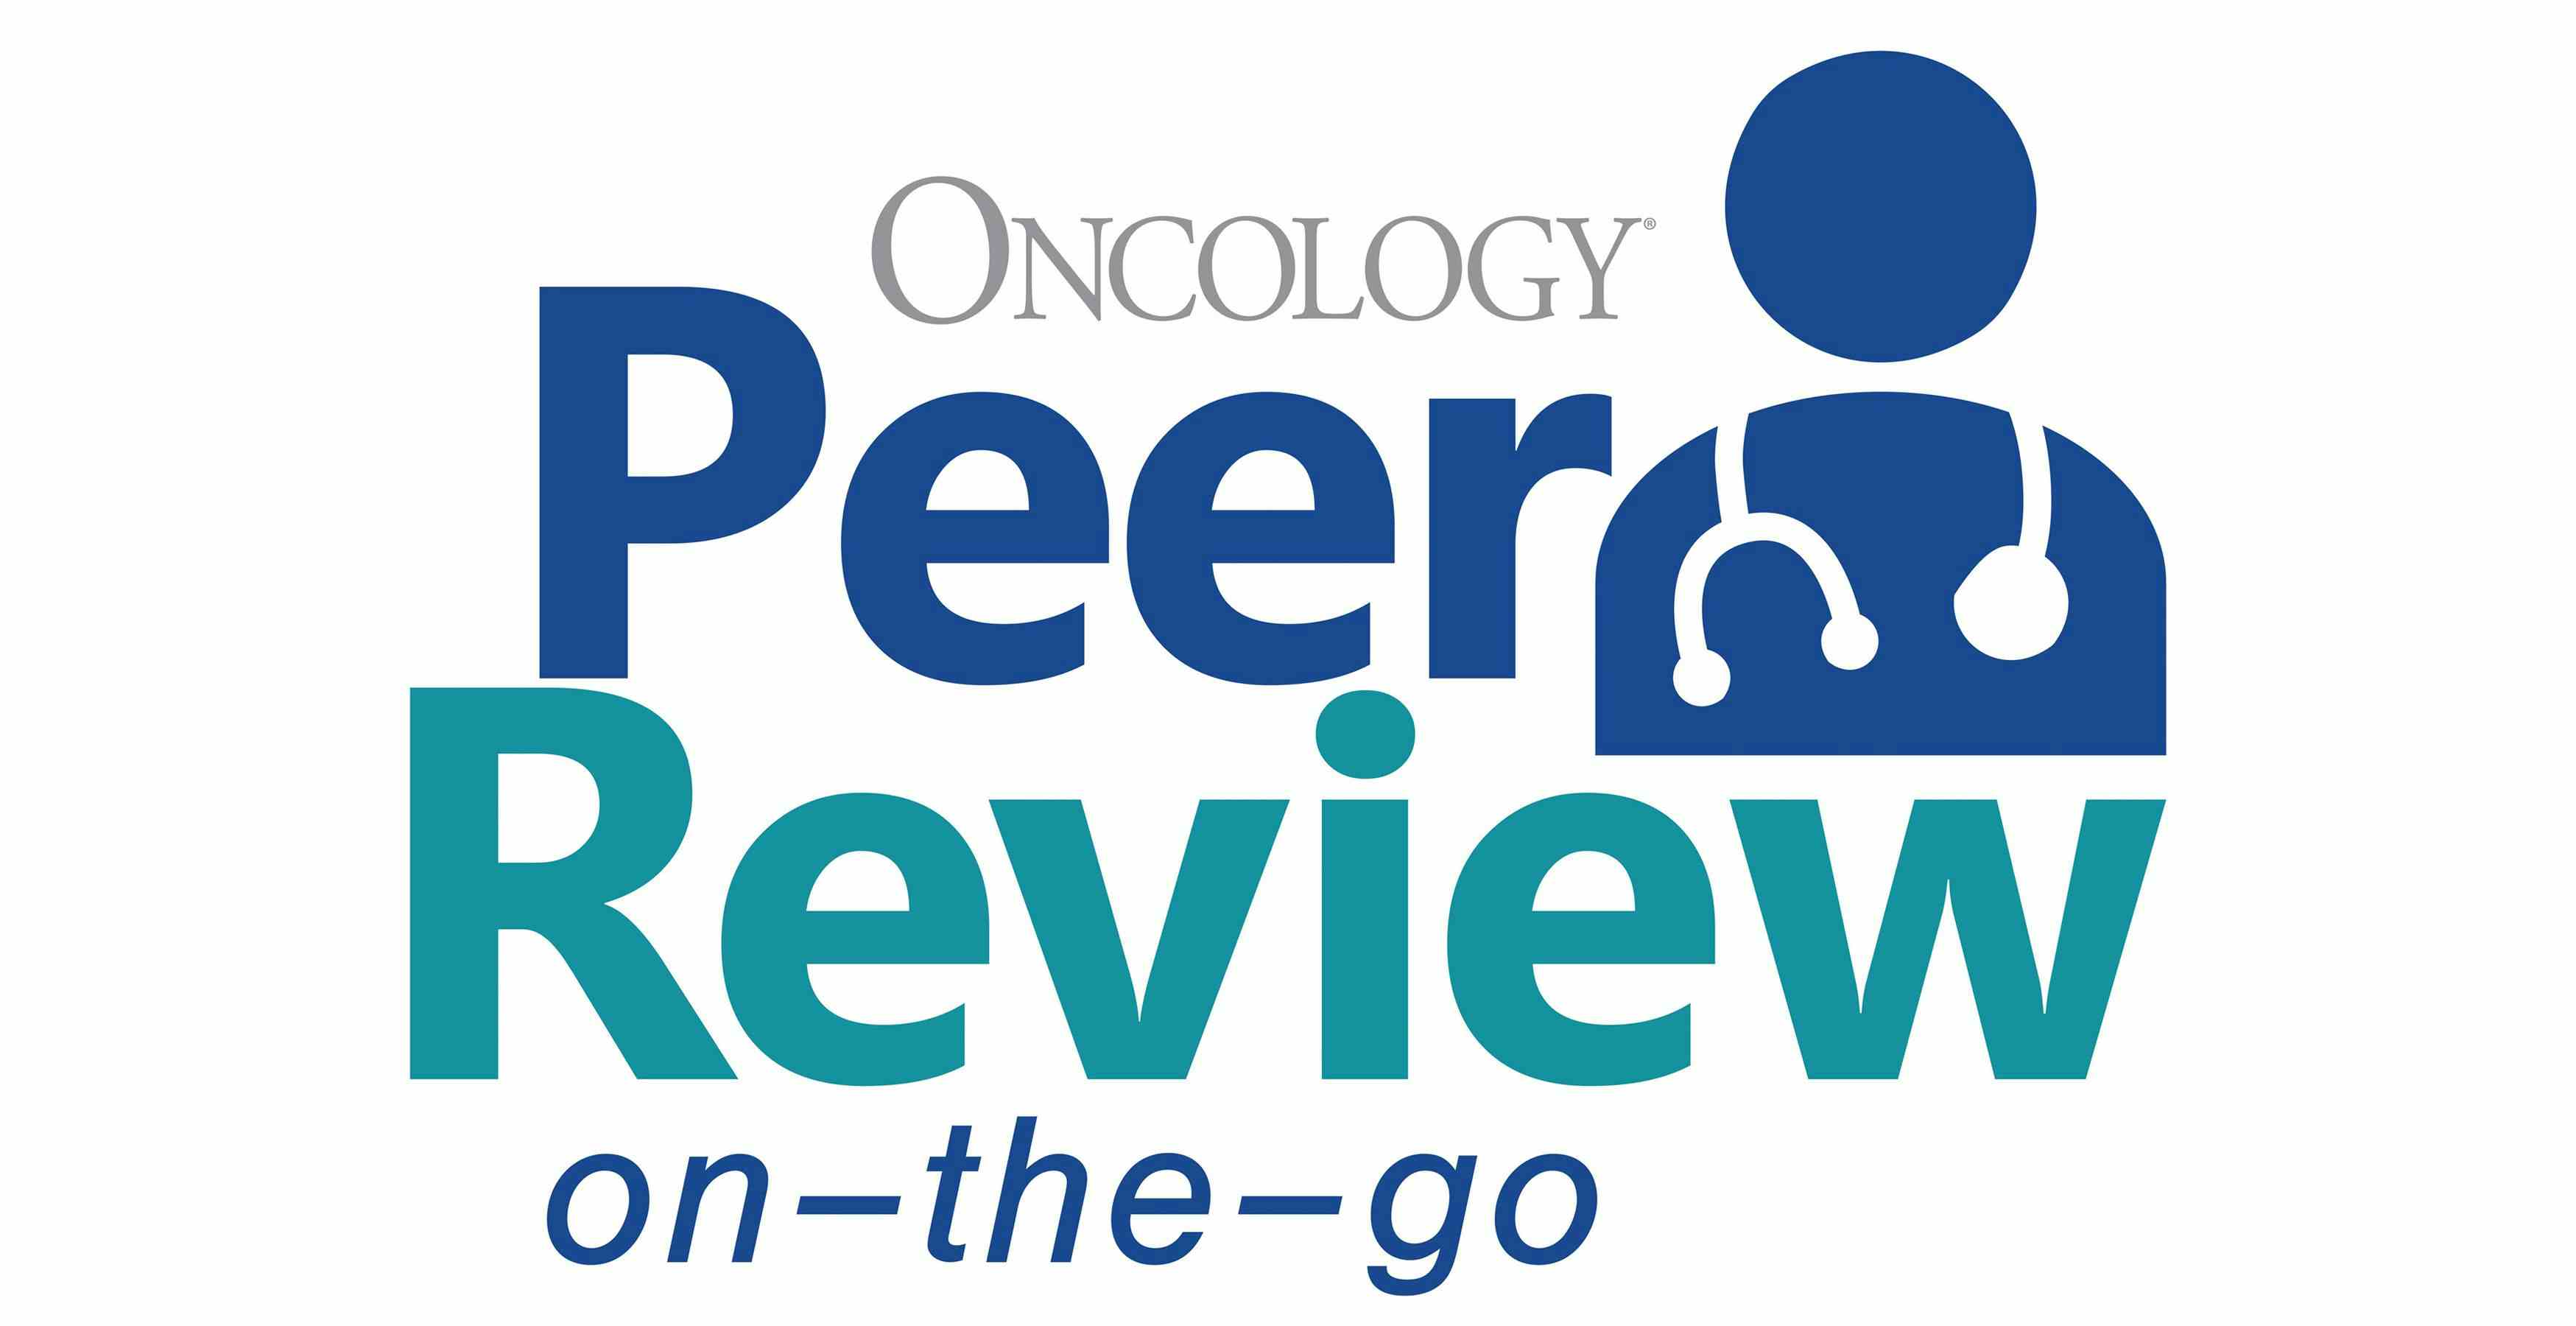 Lead author, Quirin Zangl, MD, spoke with CancerNetwork about research published in the journal ONCOLOGY focusing on the importance comprehensive geriatric assessment tools for patients with genitourinary carcinomas.